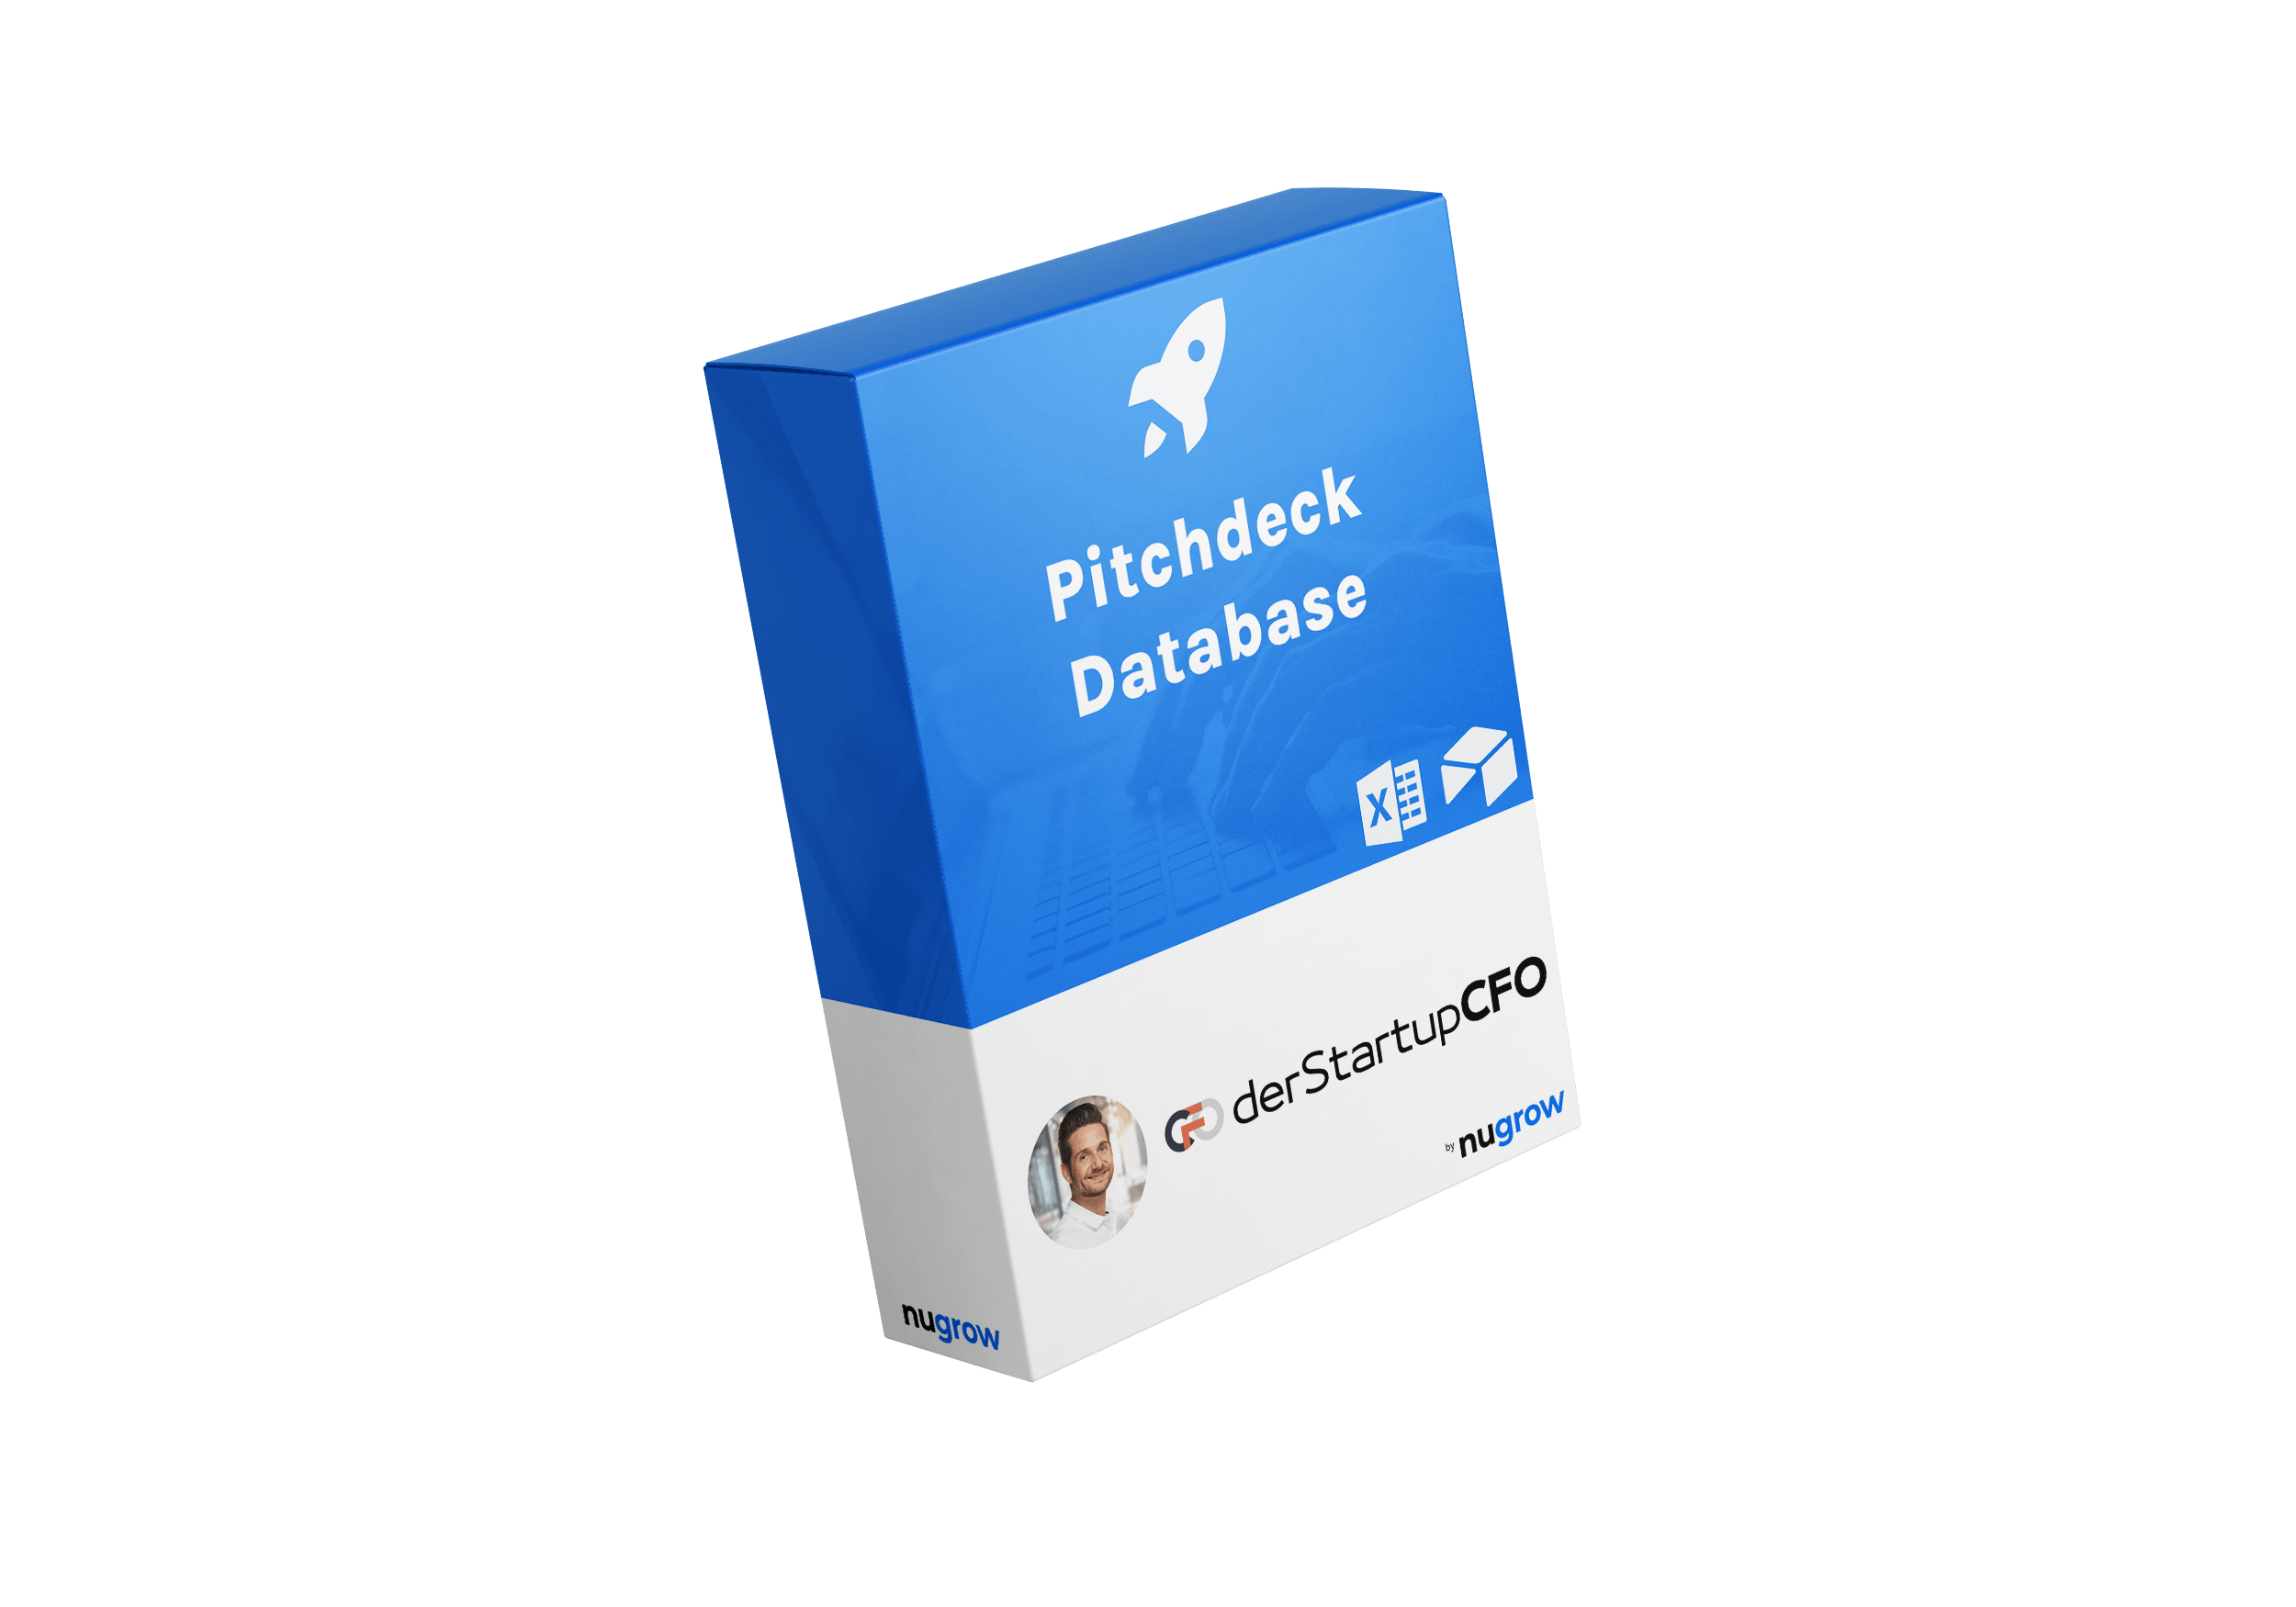 Pitchdeck-Database digital product